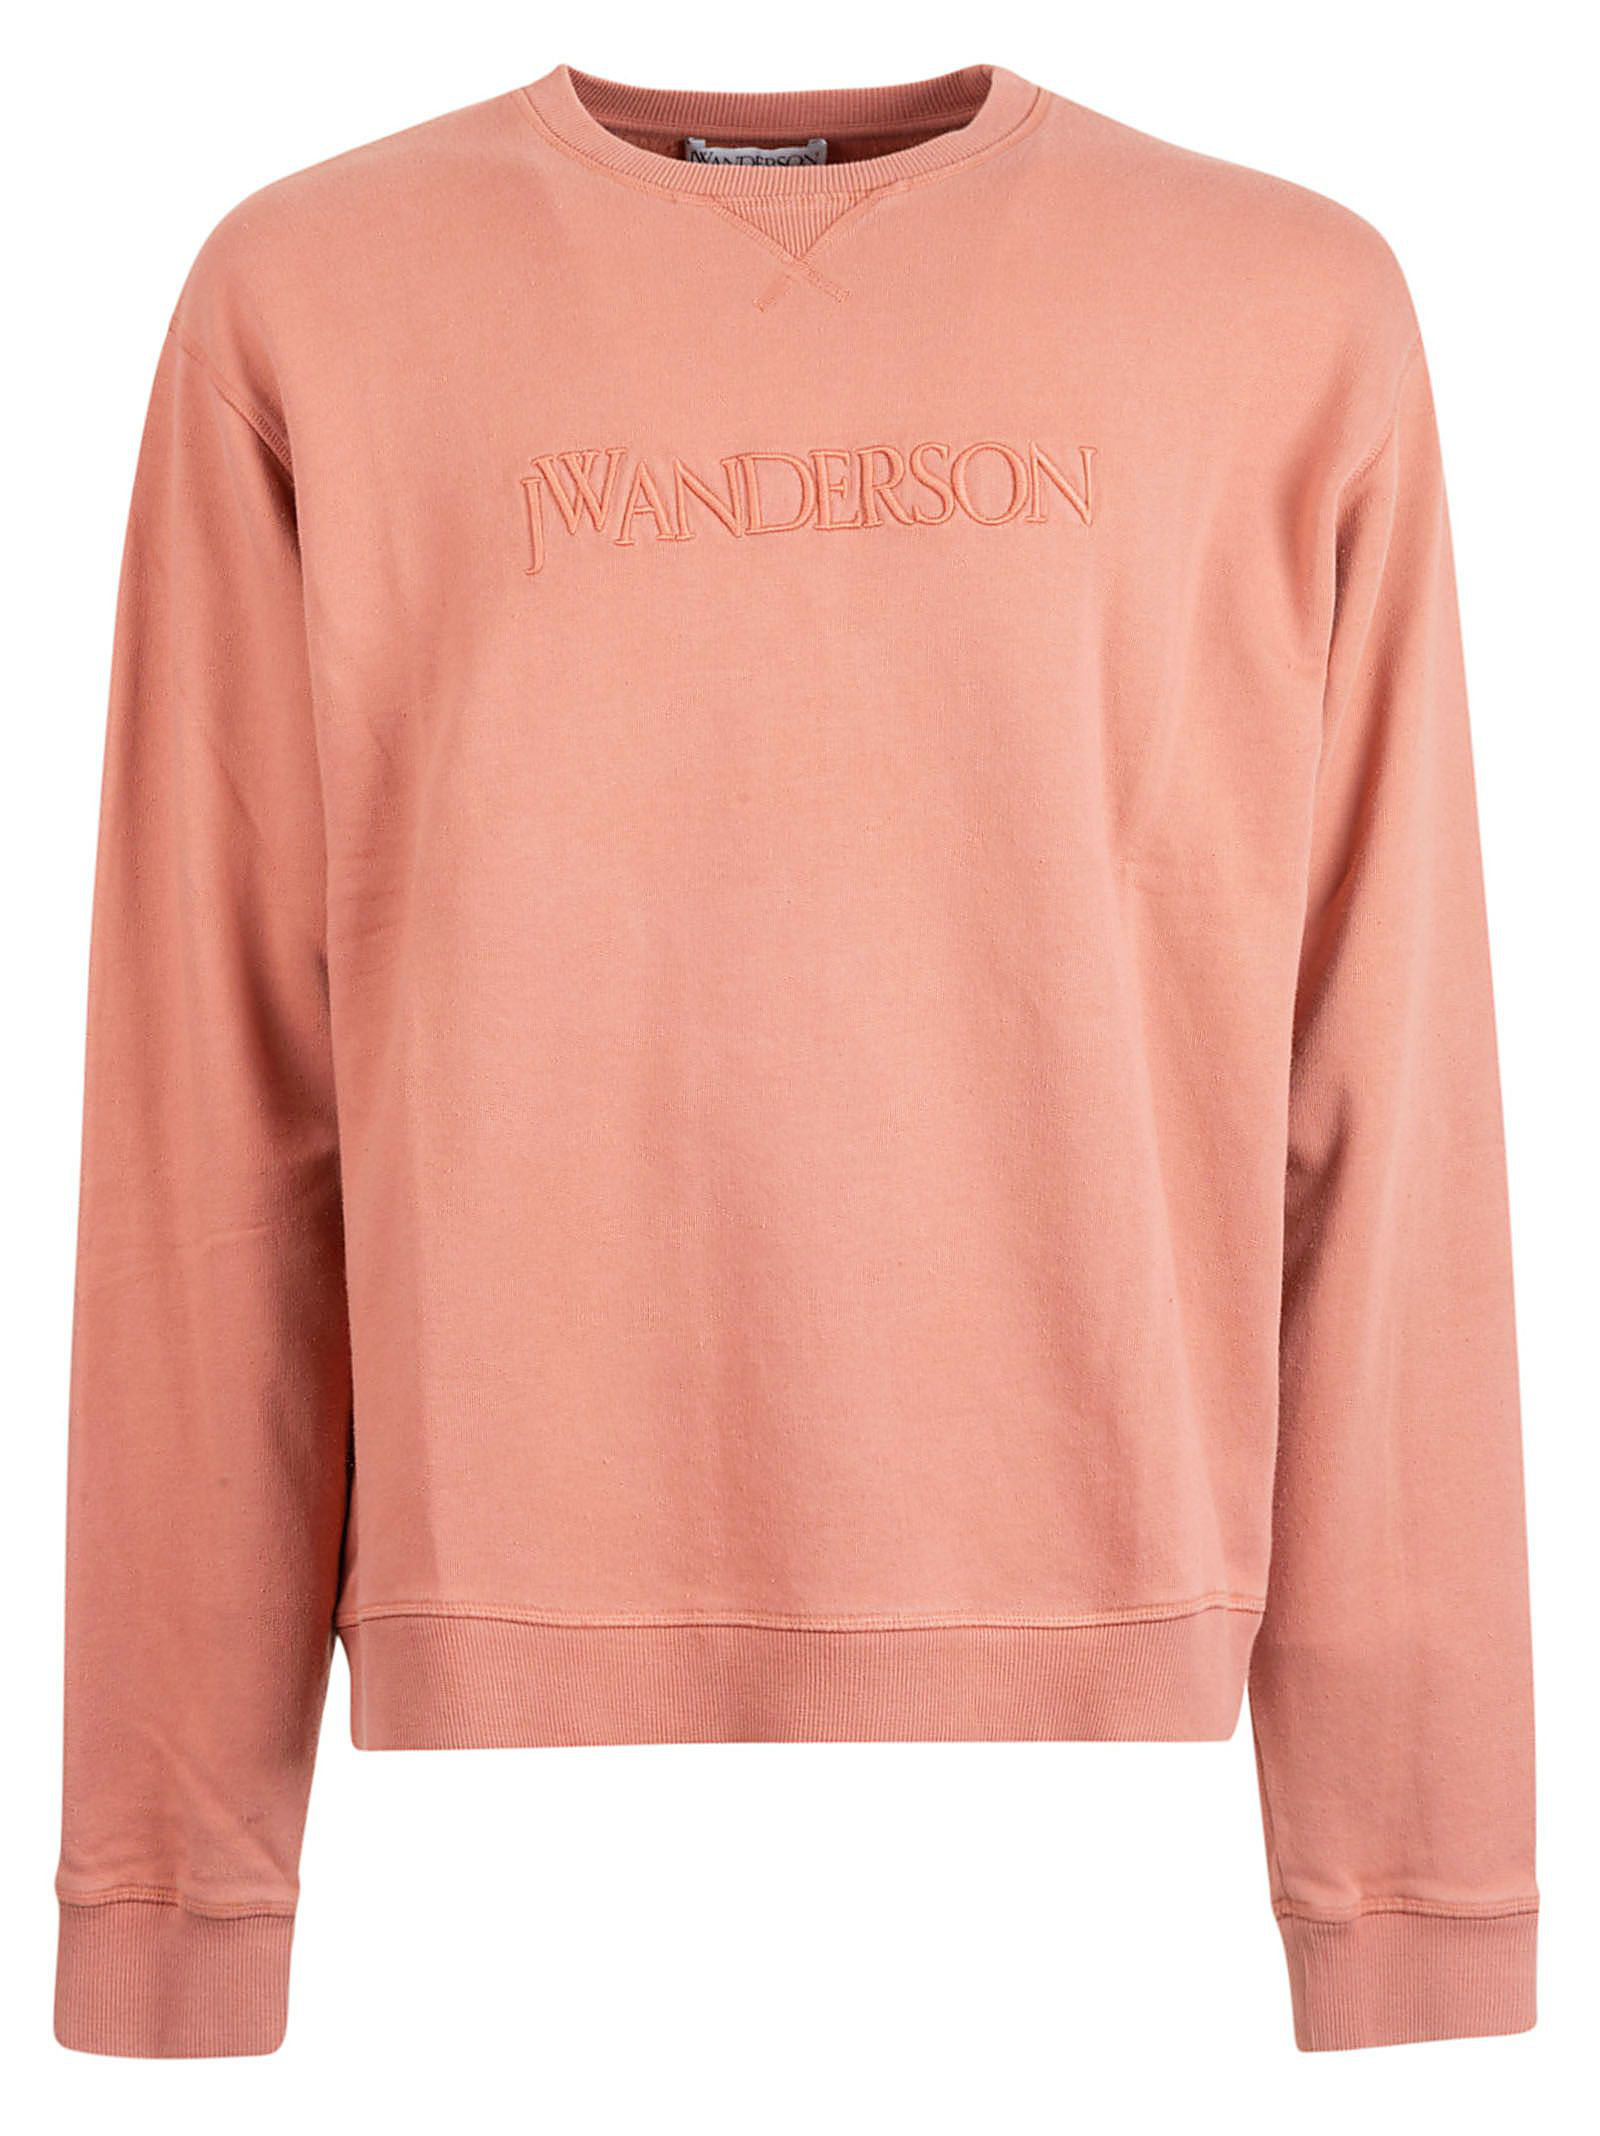 Jw Anderson Logo Embroidered Sweatshirt In Dusty Rose | ModeSens